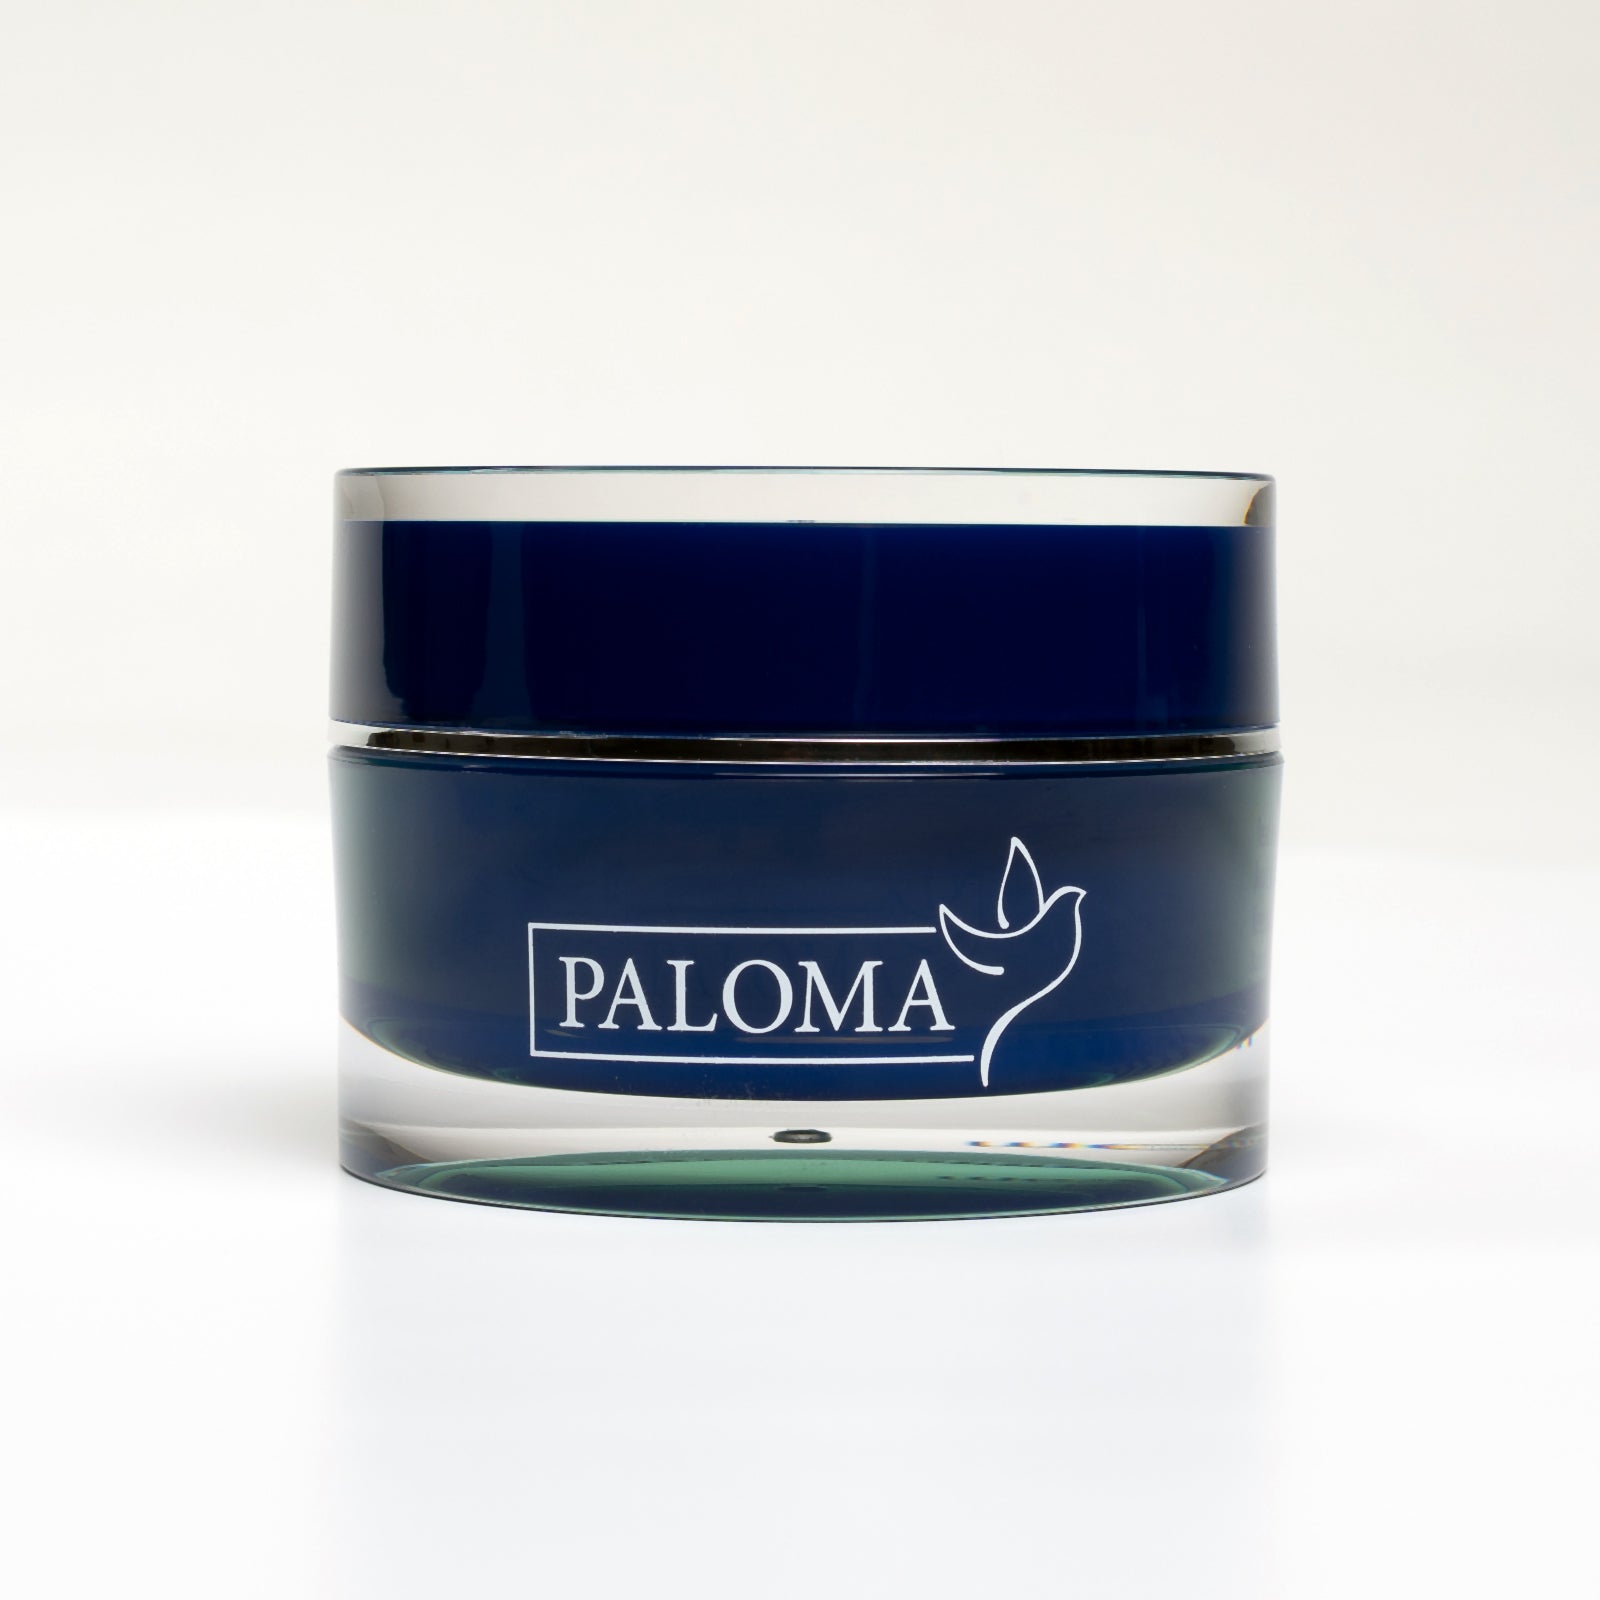 A frontal view of a refined, transparent jar topped with a deep blue lid, prominently featuring the name 'PALOMA' in elegant white typography accompanied by a stylized dove logo. Inside the jar lies the renowned Paloma builder gel, designed for nail enhancements, showcased against a crisp, white backdrop that underscores the professional quality of the studio photograph.